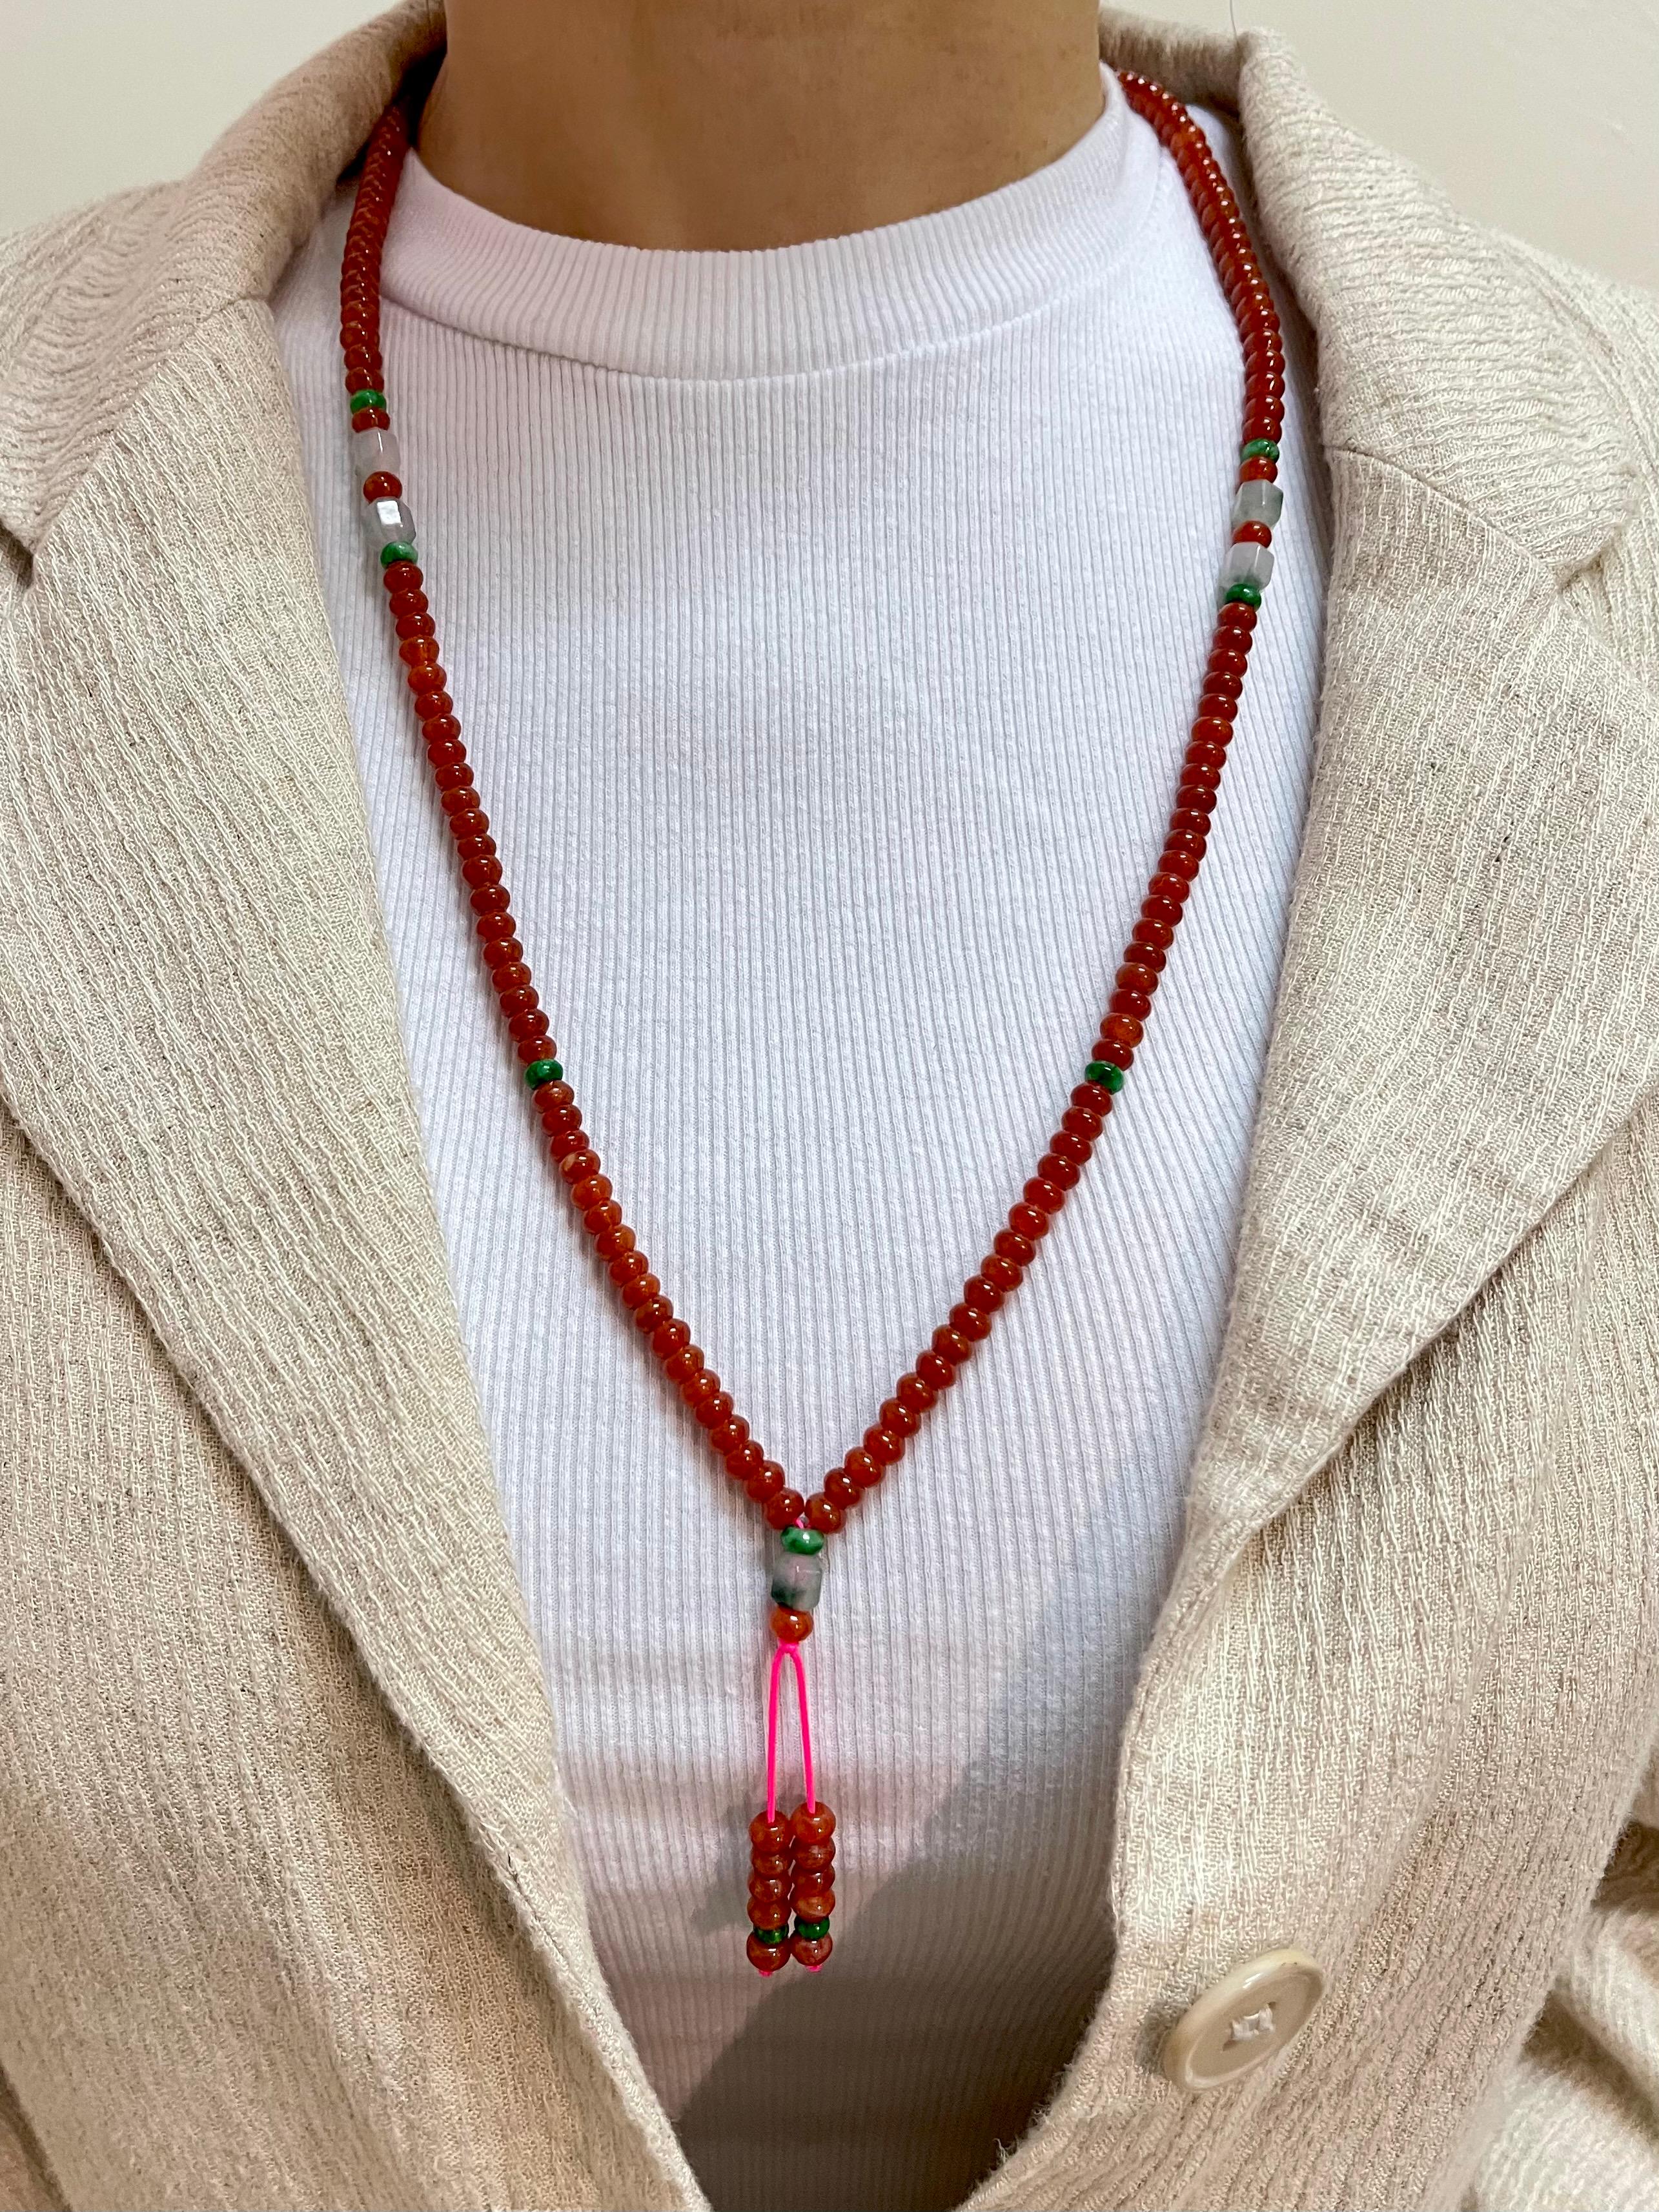 Please check out the HD video for the most accurate color. This bead necklace is certified by 2 labs. The certified natural icy red jadeite strand of bead necklace is not common. The red jade is even in color and translucent. In the trade, it is